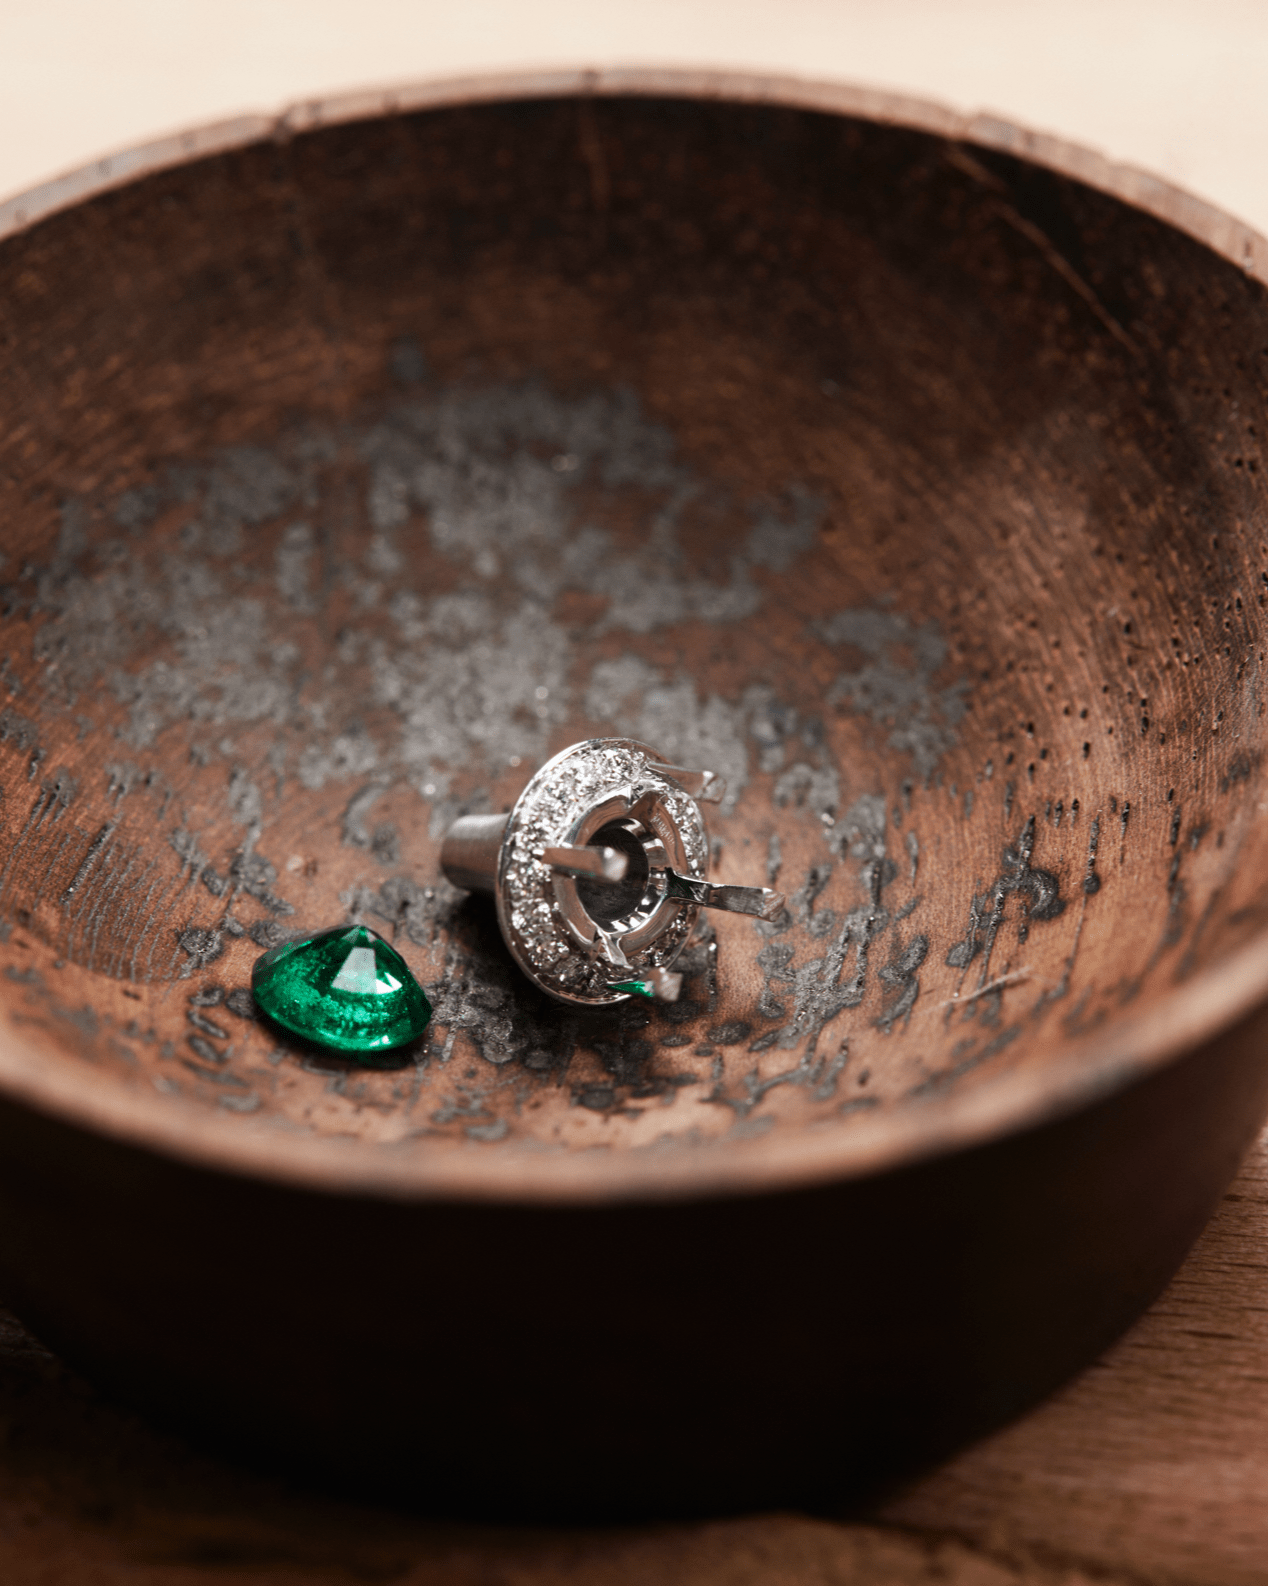 Boucheron emeralds being cared for in our atelier